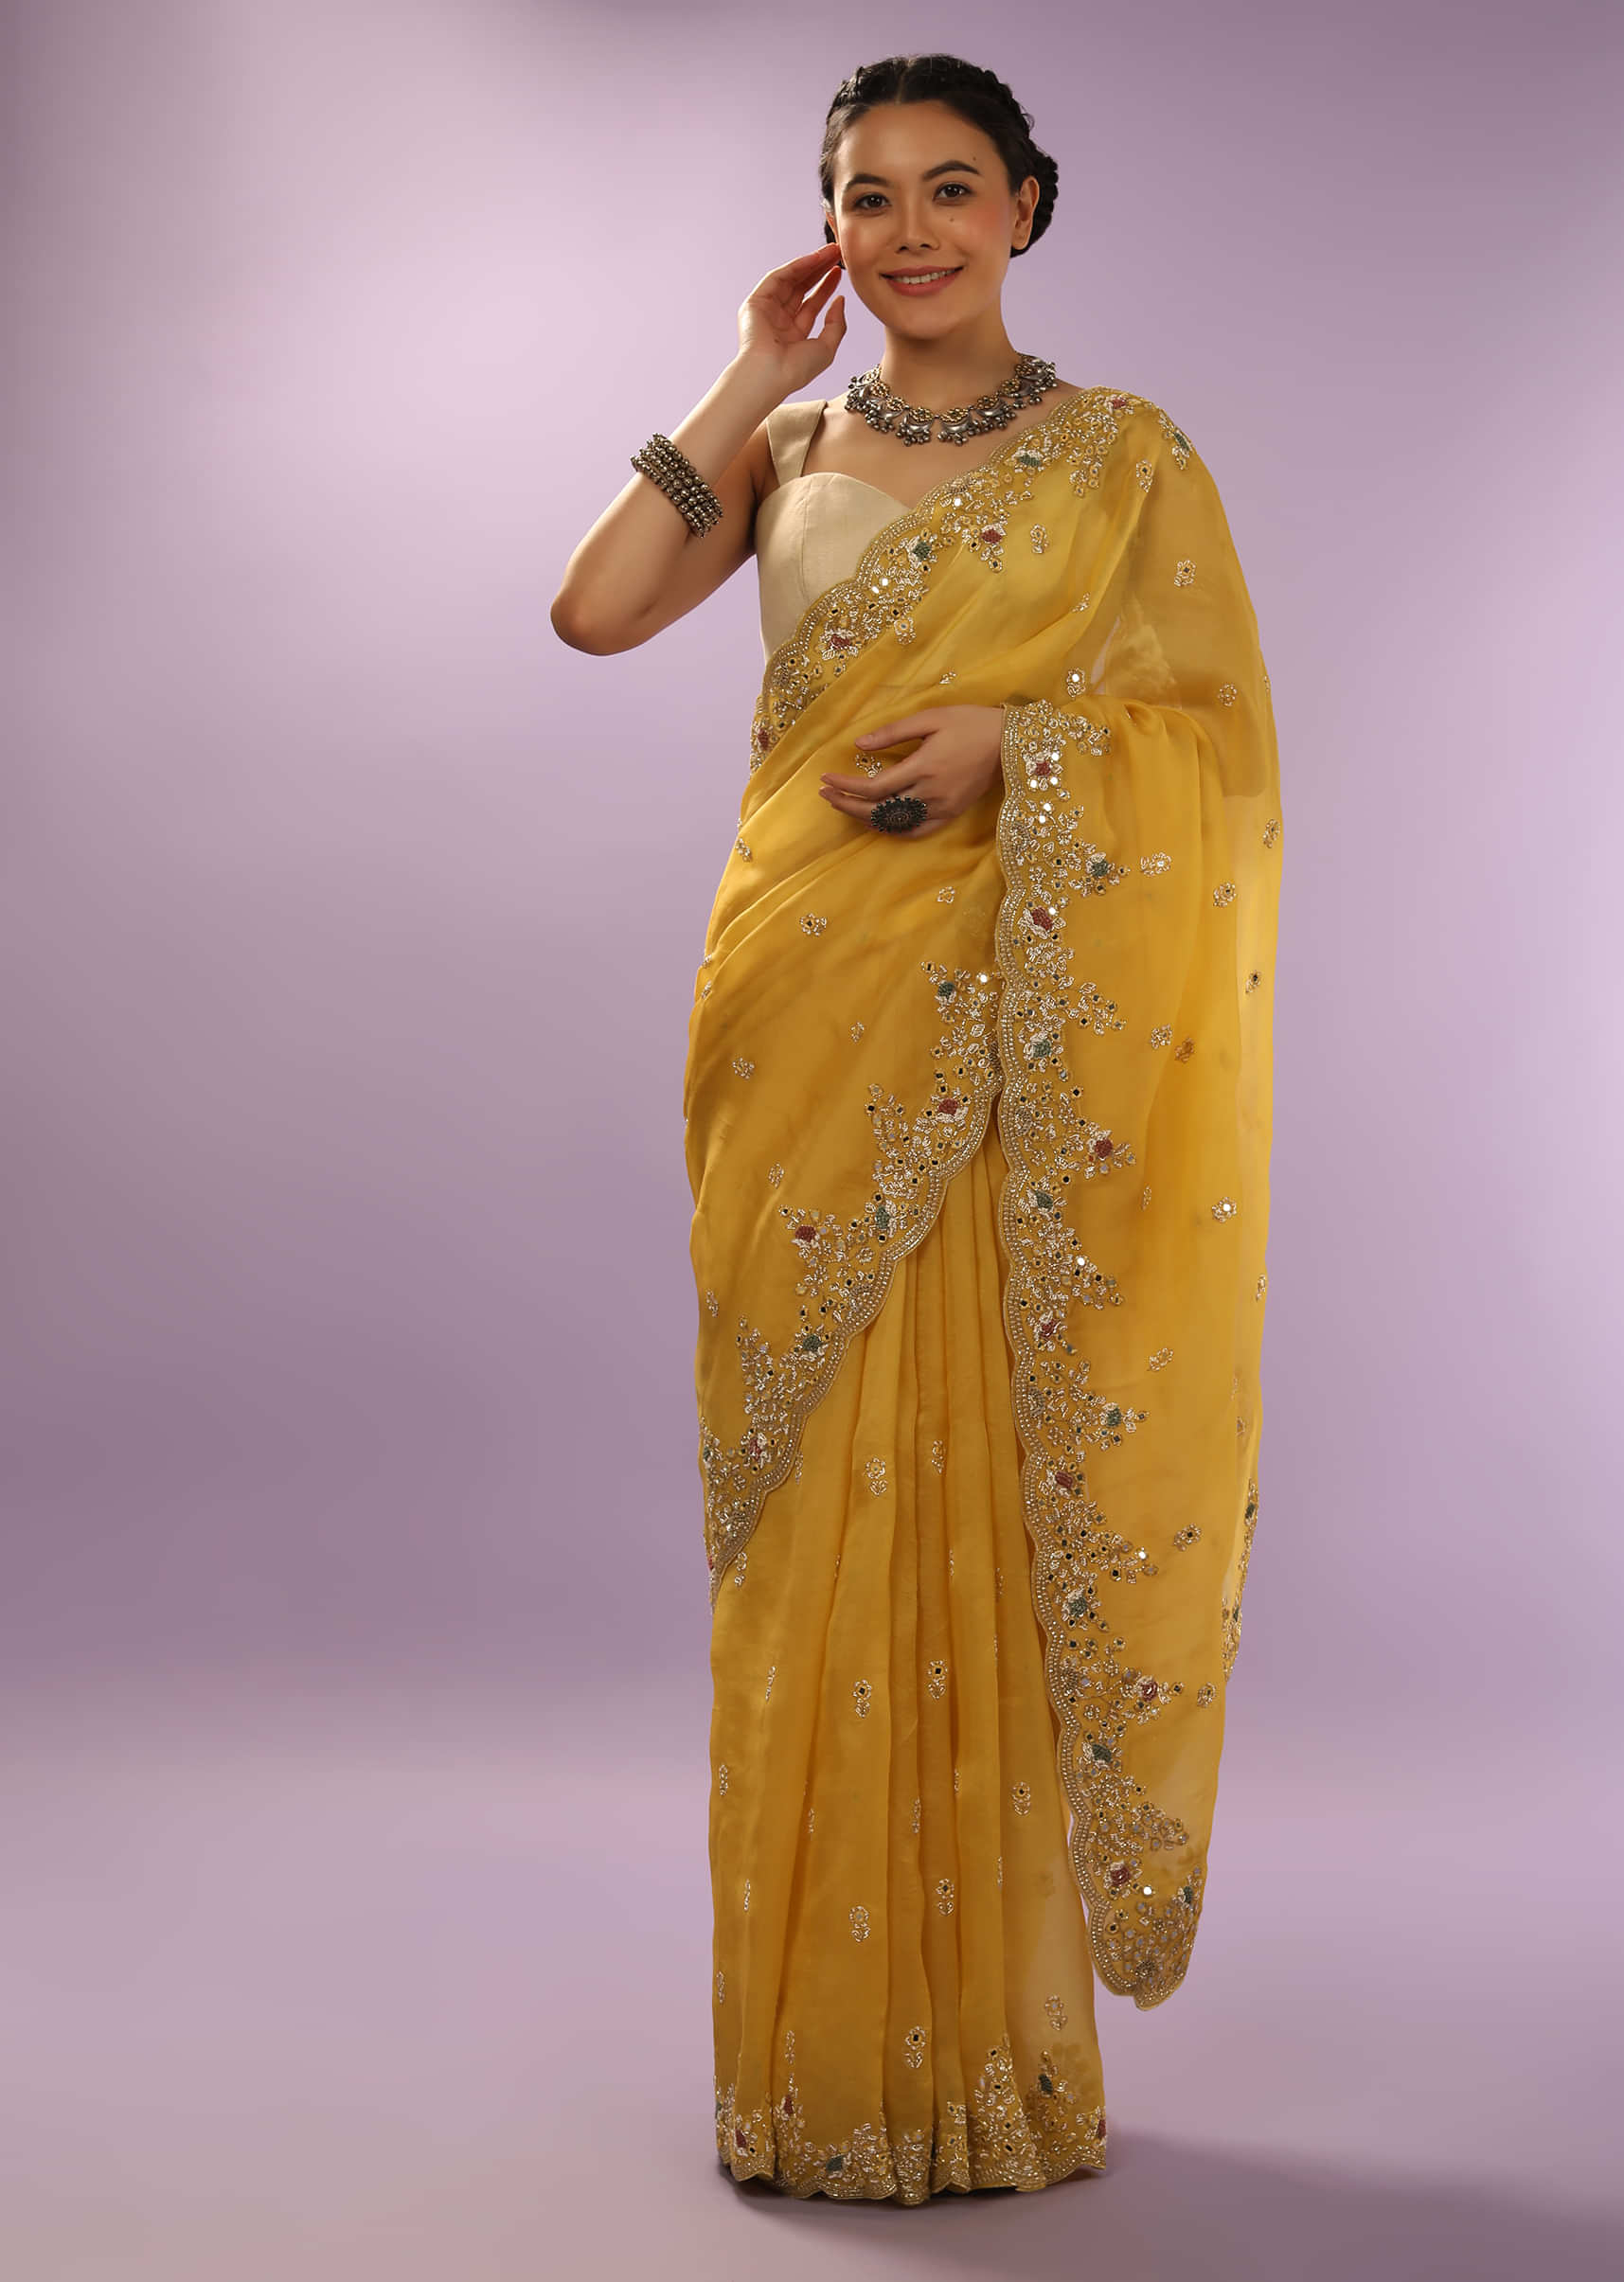 Canary Yellow Saree In Organza With Mirror And Cut Dana Embroidered Floral Motifs On The Border 